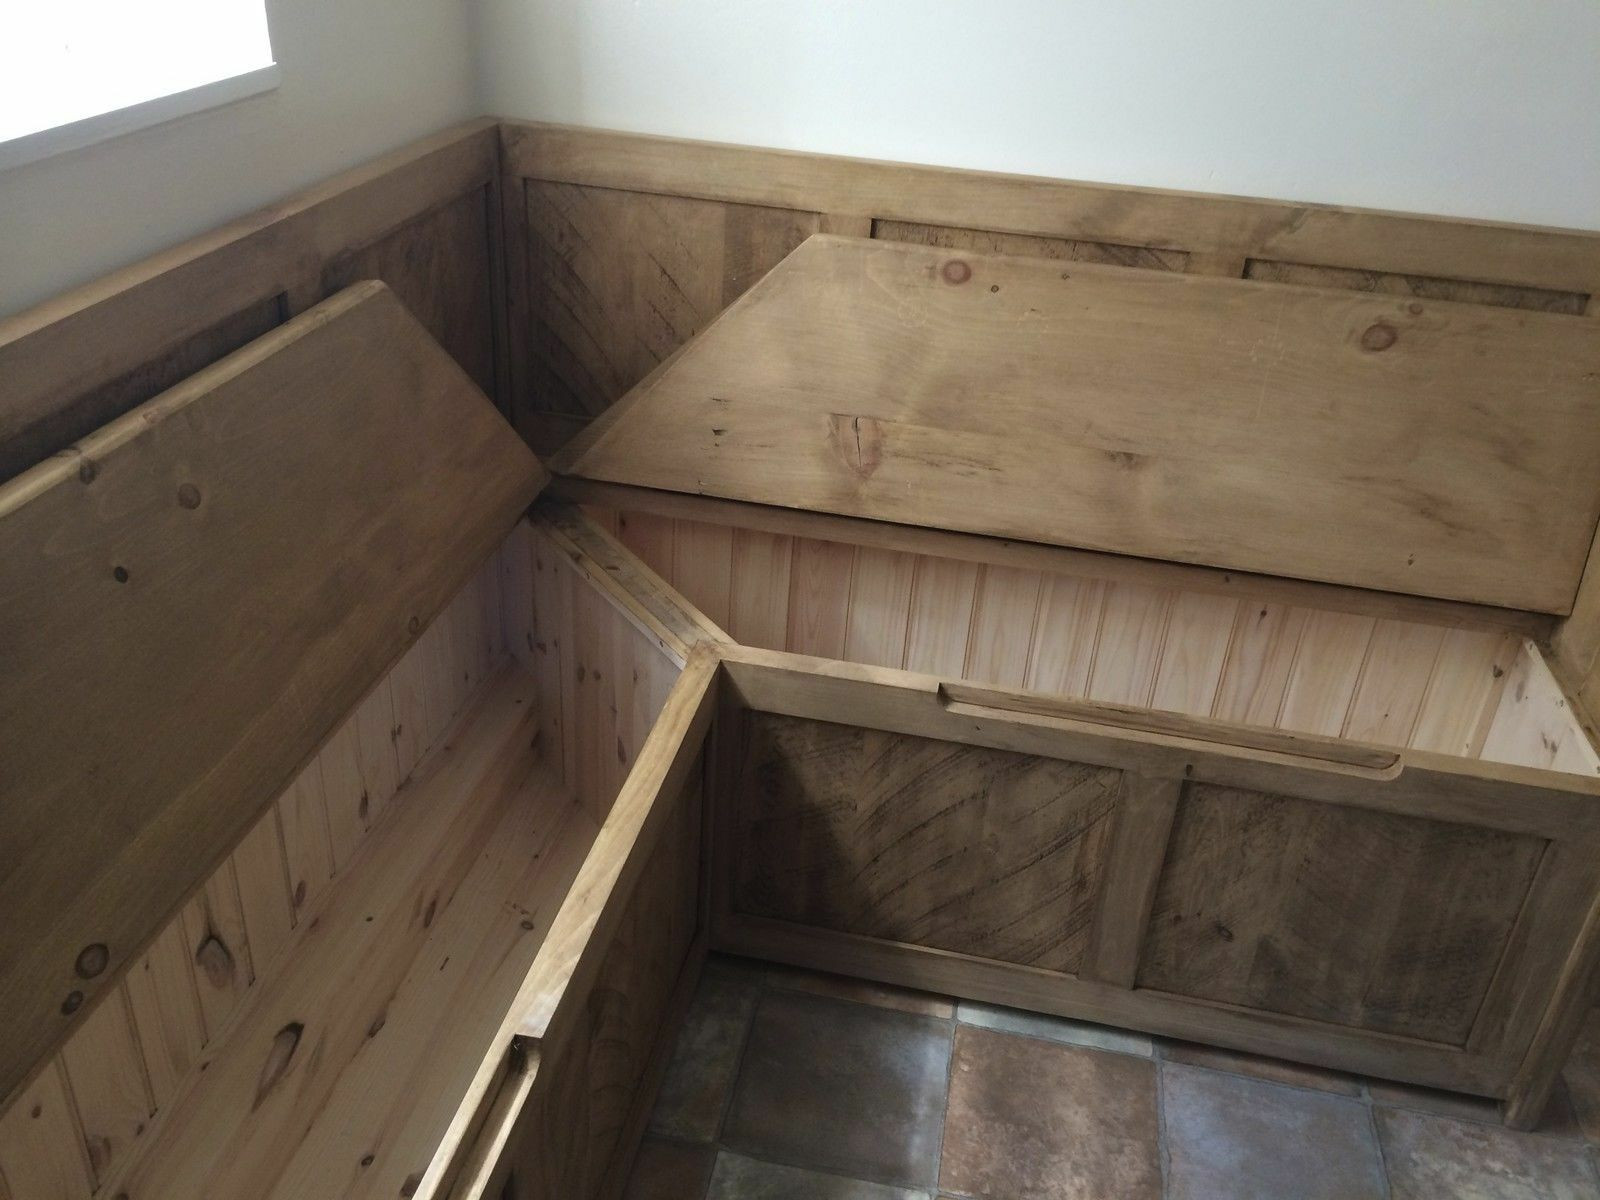 Corner Bench Seating With Storage
 How to Build a Corner Storage Bench